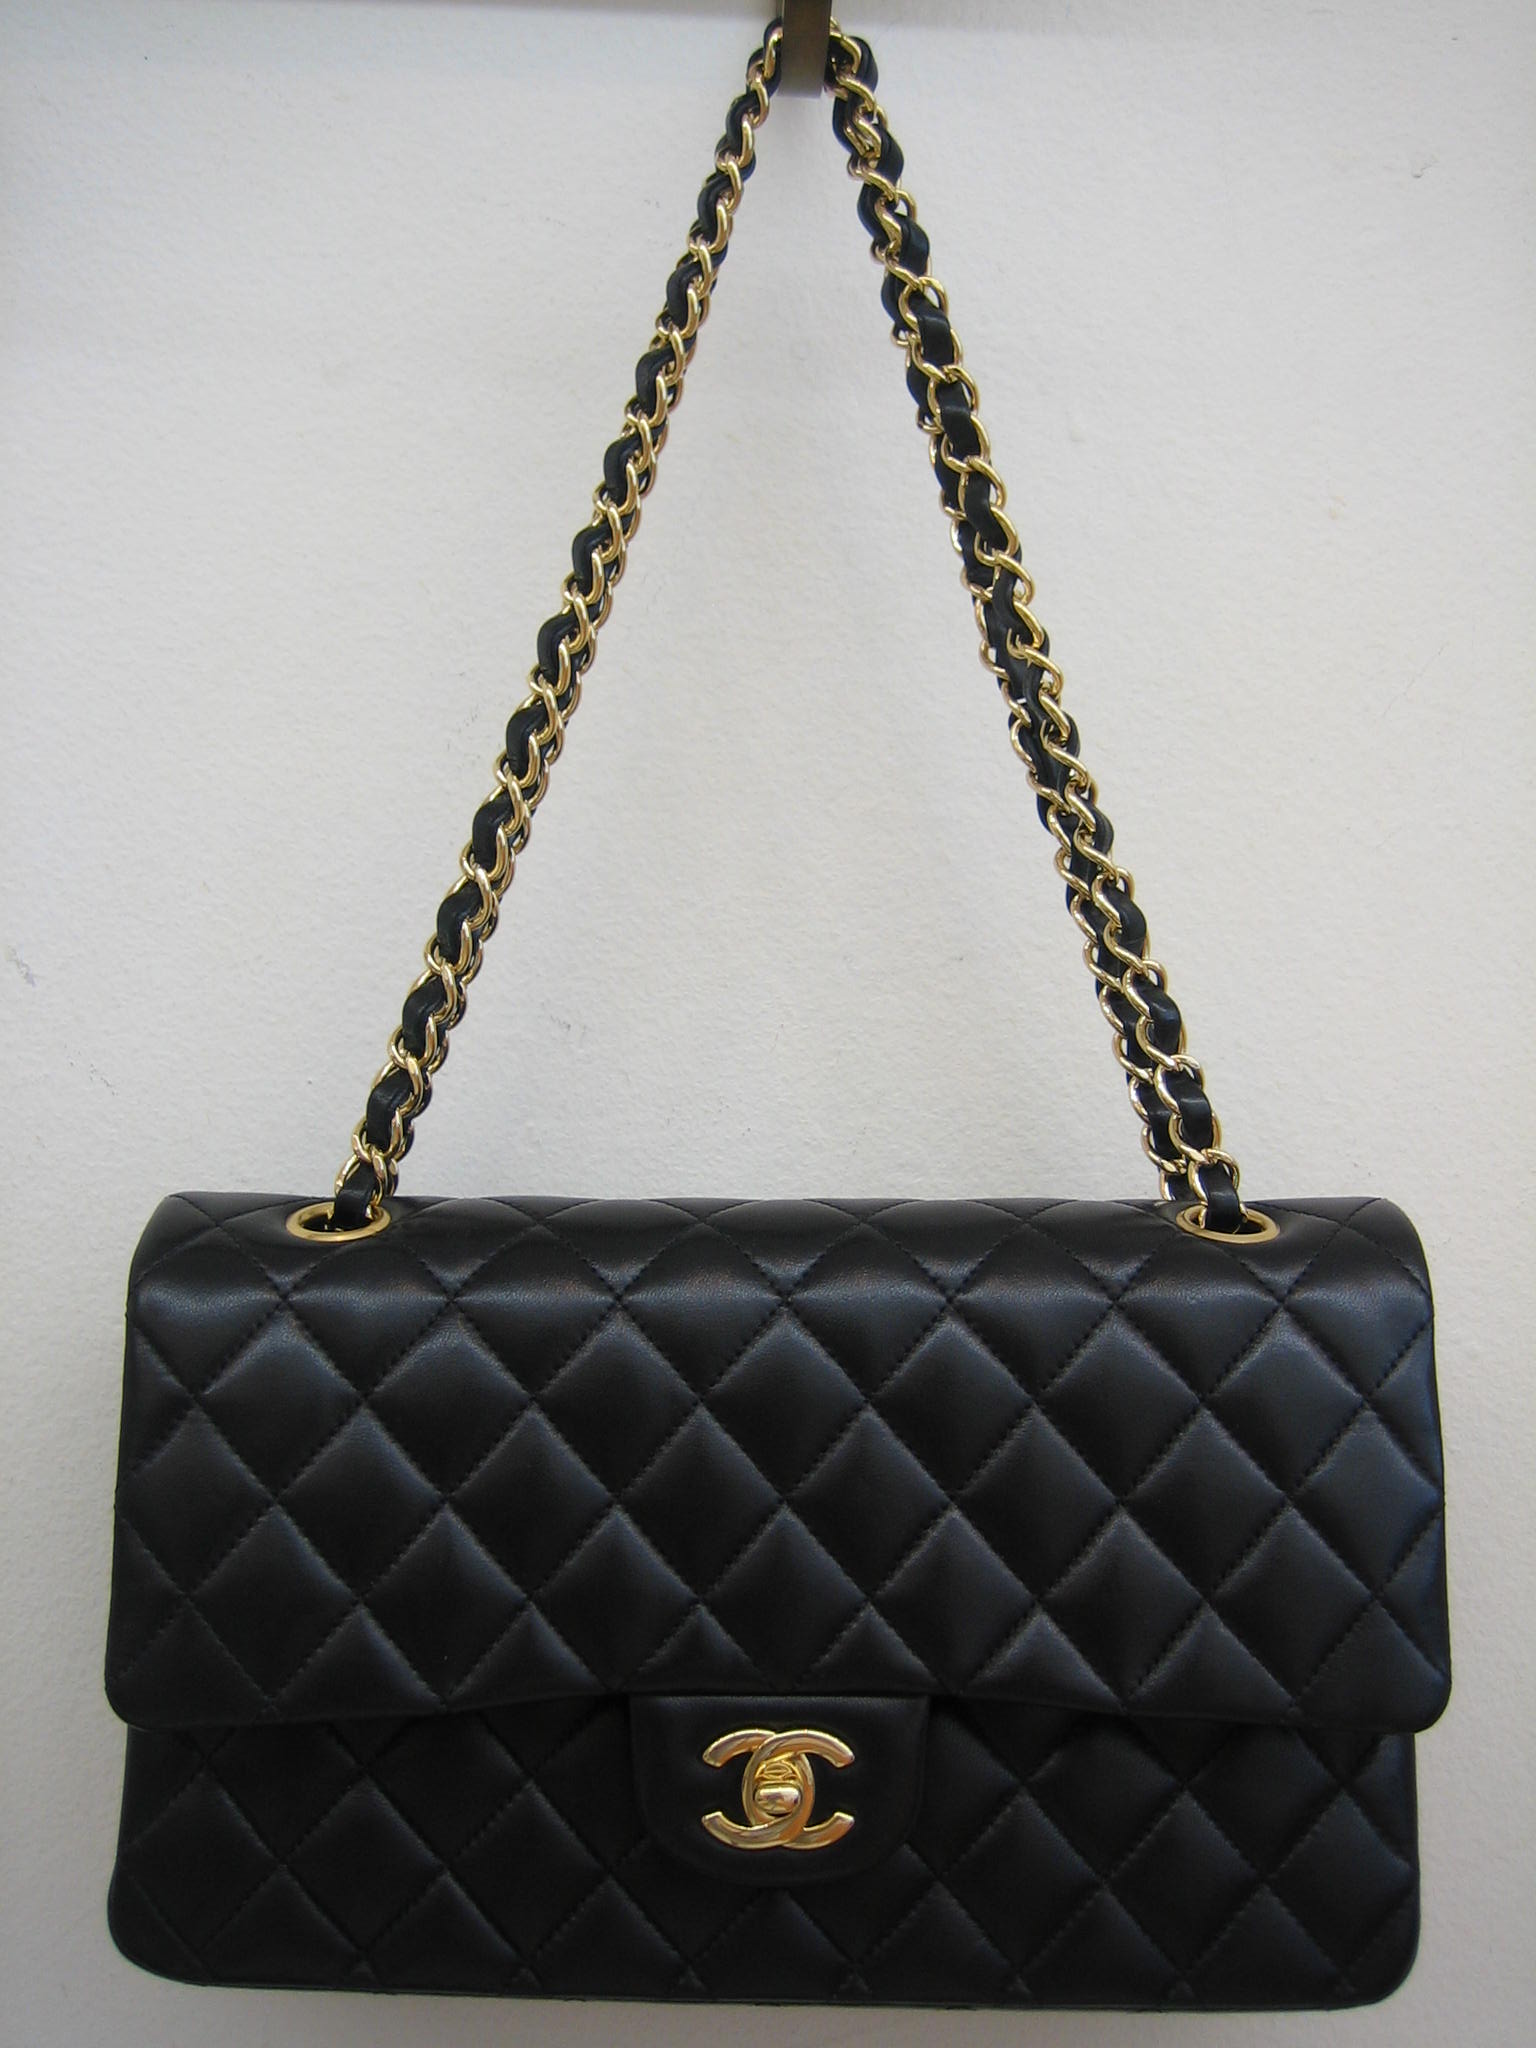 Chanel Classic Flap - The Cat's Meow